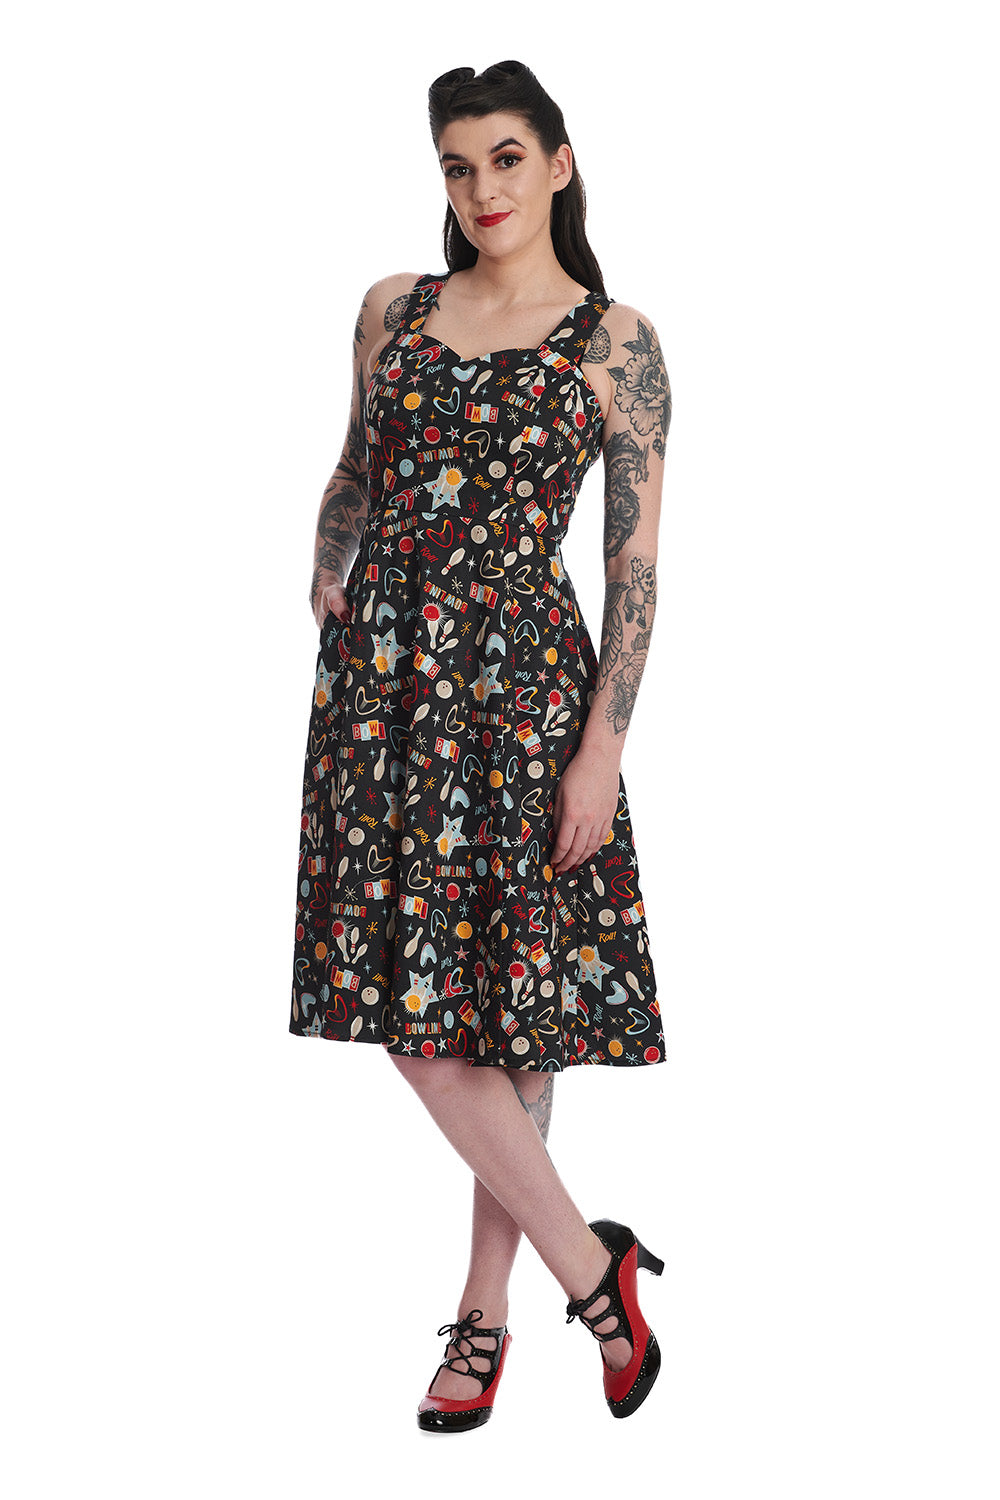 Let's Go Bowling Cardigan 1950s Inspired Swing Dress